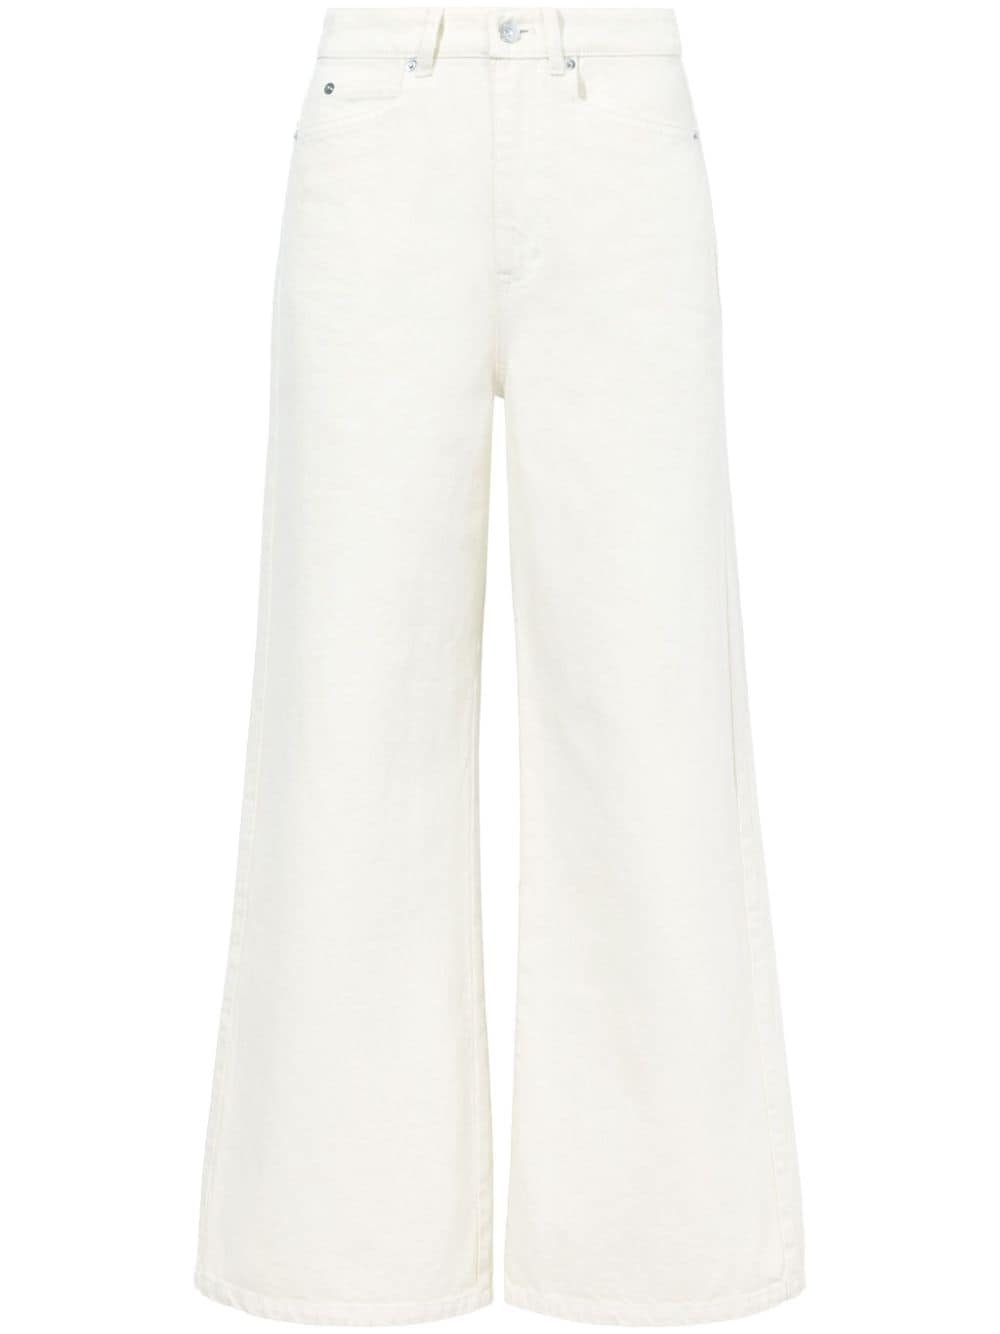 Proenza Schouler White Label Cropped-Jeans mit Logo-Patch - Weiß von Proenza Schouler White Label